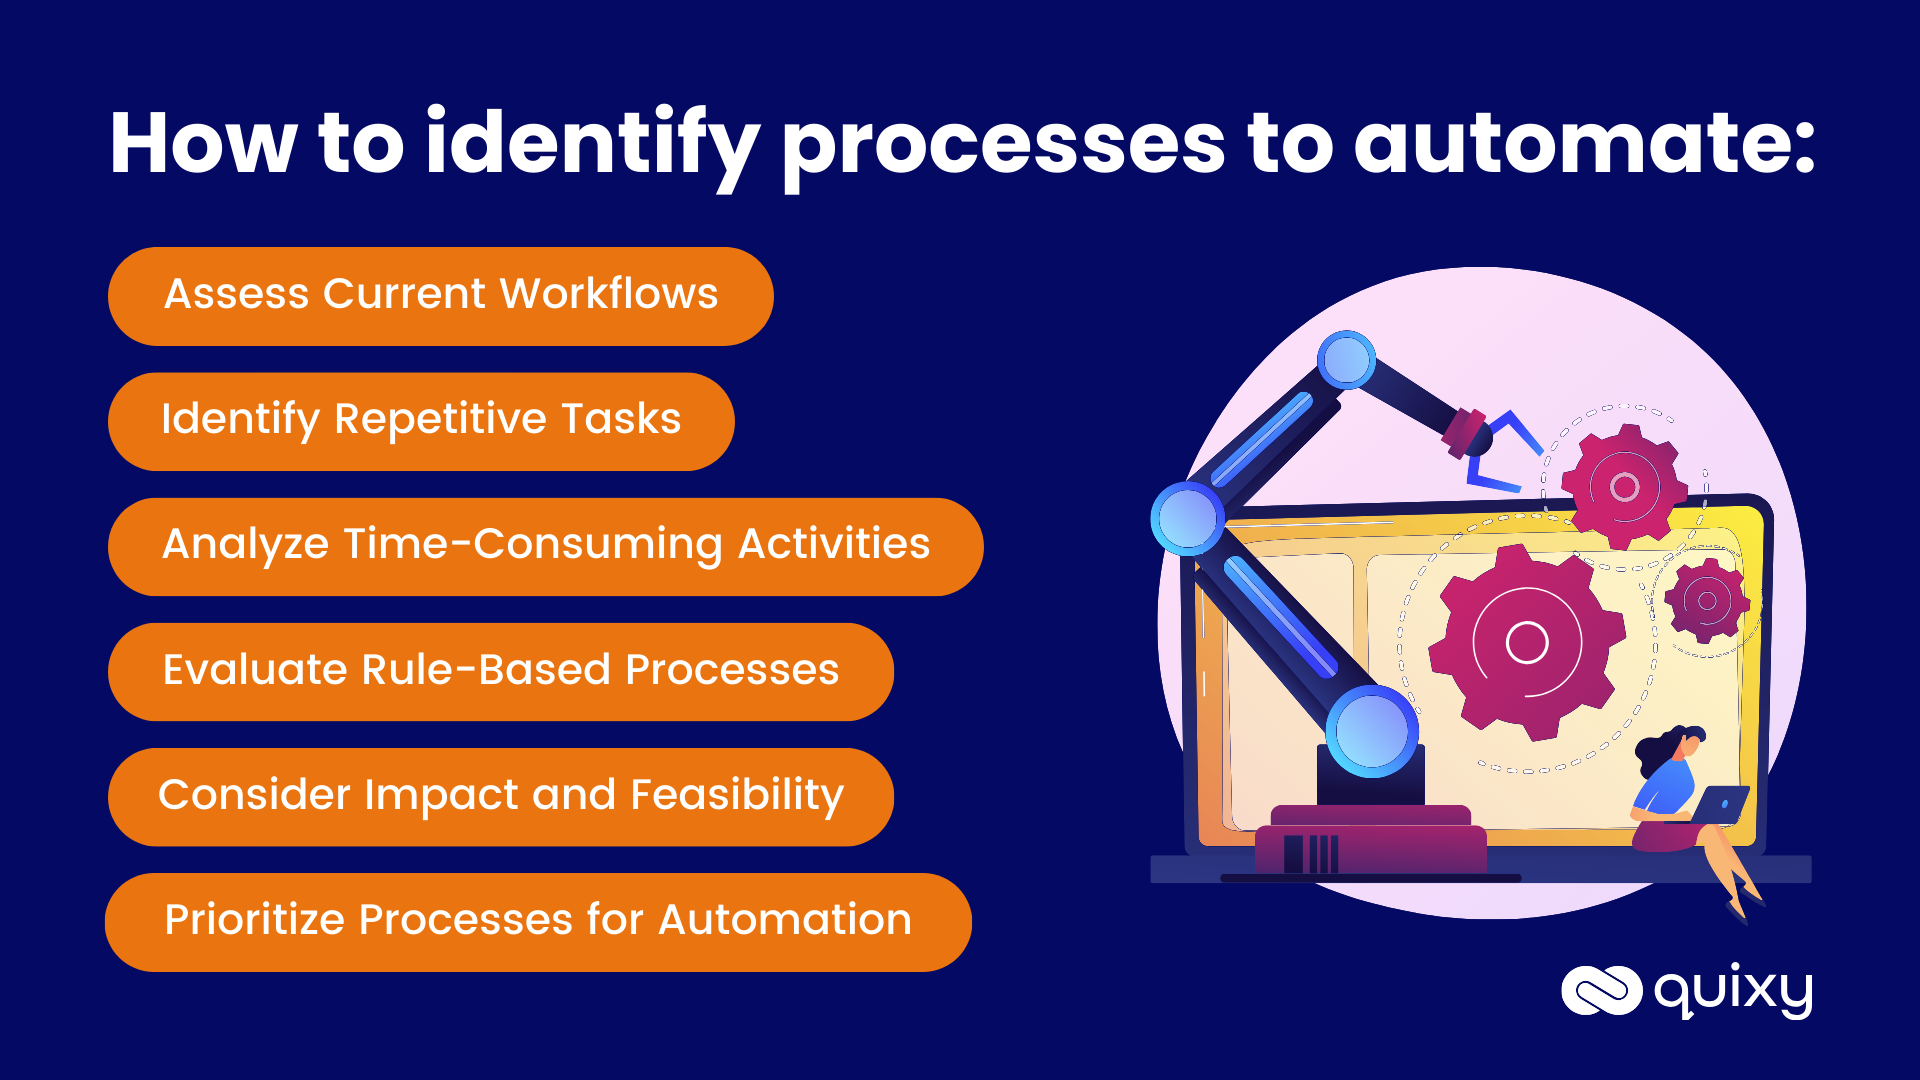 How to identify processes to automate